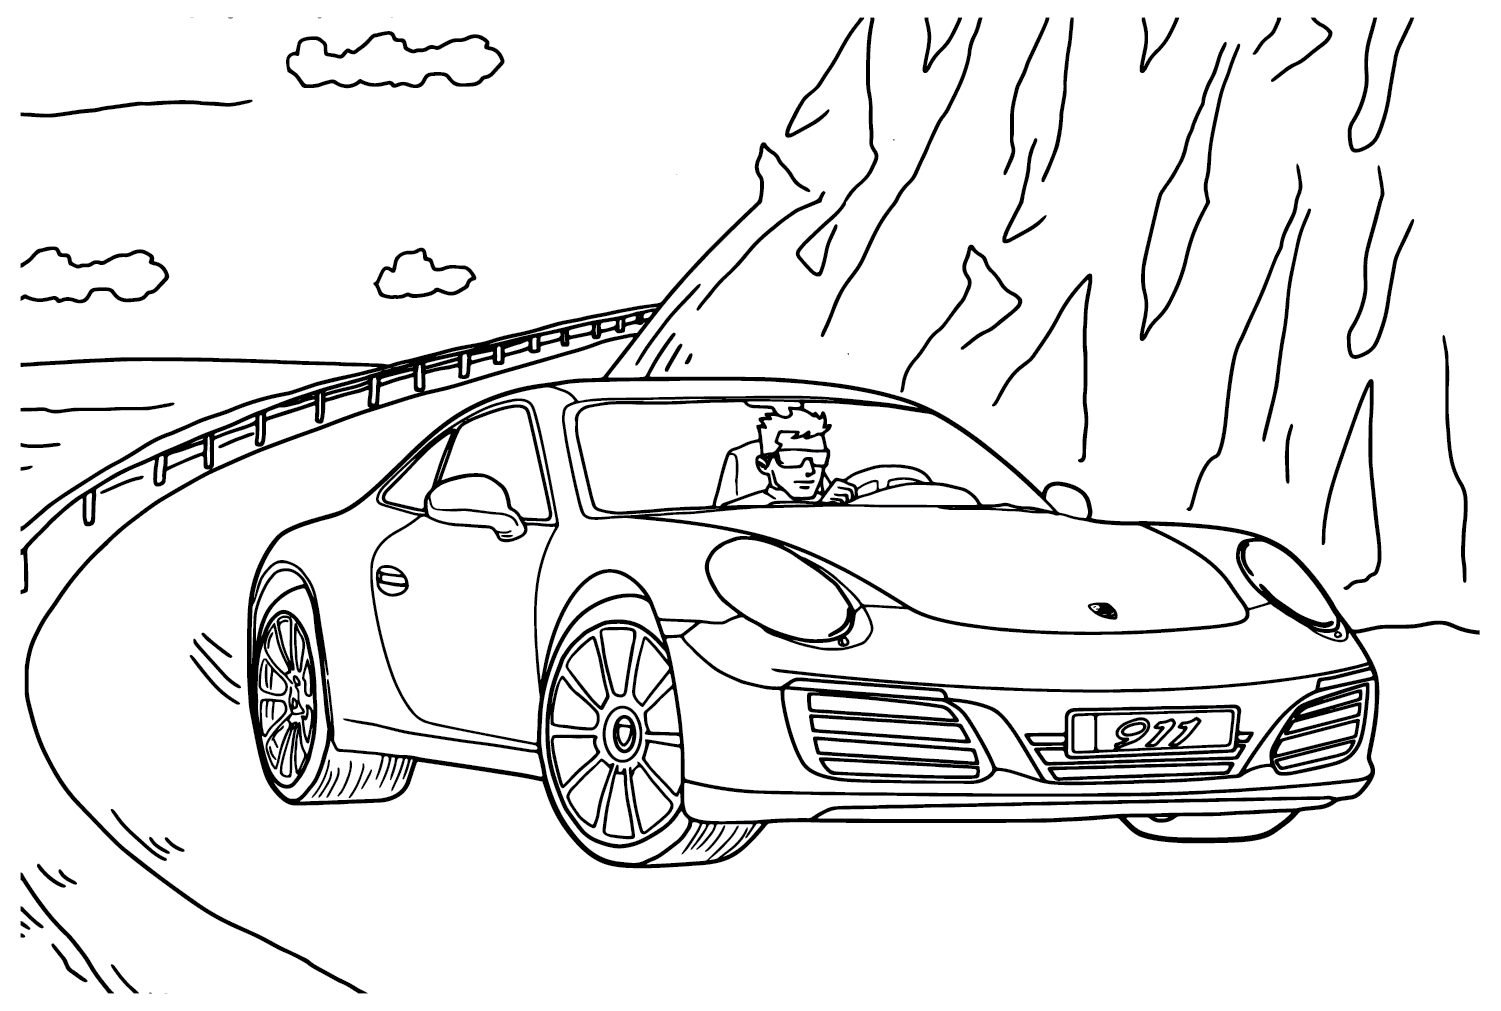 Porsche Coloring Pages to Print - Free Printable Coloring Pages